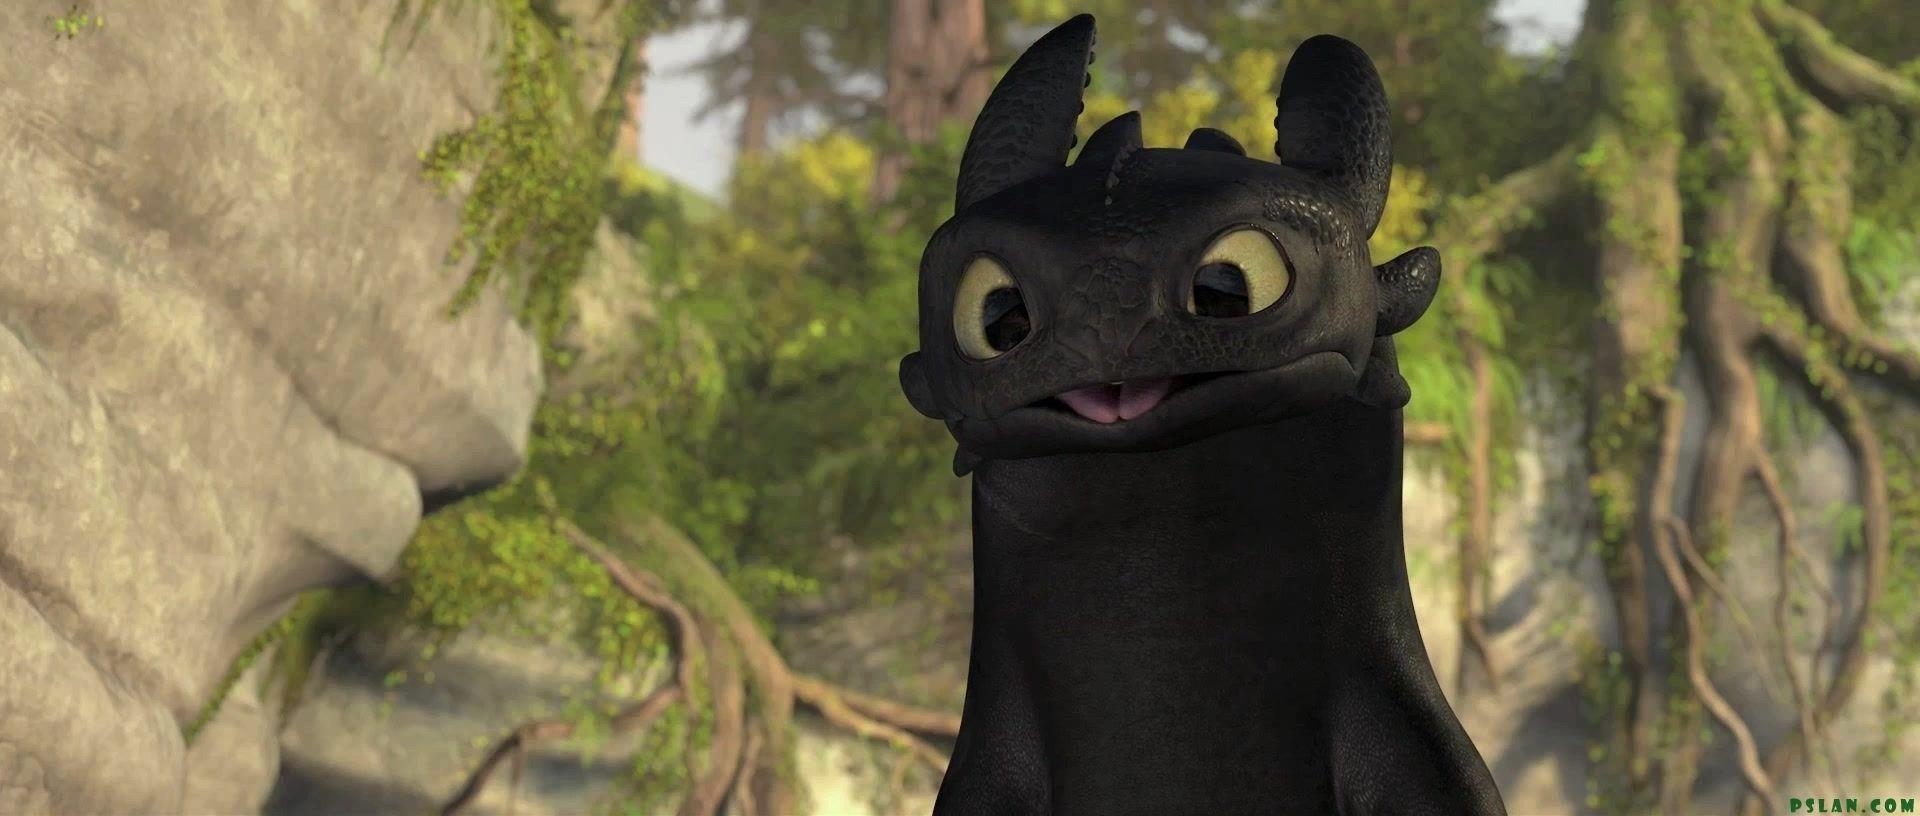 Toothless Smiling Wallpapers - Wallpaper Cave